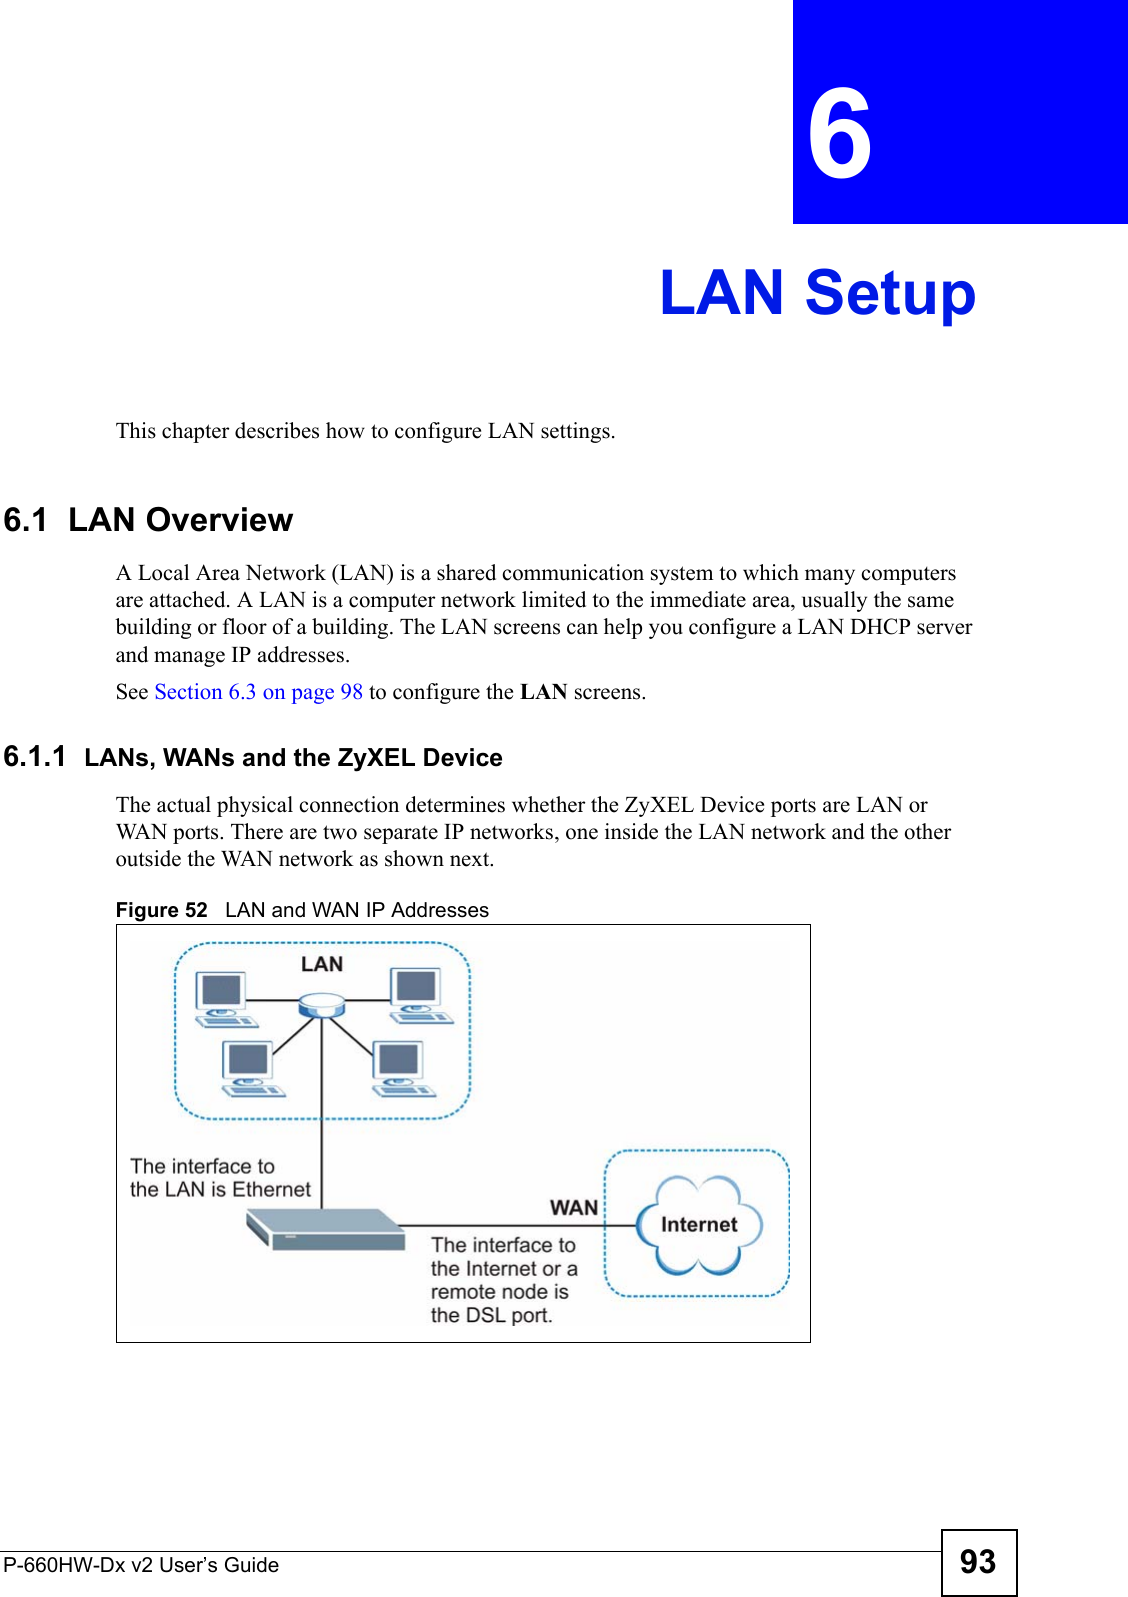 P-660HW-Dx v2 User’s Guide 93CHAPTER  6 LAN SetupThis chapter describes how to configure LAN settings.6.1  LAN Overview A Local Area Network (LAN) is a shared communication system to which many computers are attached. A LAN is a computer network limited to the immediate area, usually the same building or floor of a building. The LAN screens can help you configure a LAN DHCP server and manage IP addresses.  See Section 6.3 on page 98 to configure the LAN screens. 6.1.1  LANs, WANs and the ZyXEL DeviceThe actual physical connection determines whether the ZyXEL Device ports are LAN or WAN ports. There are two separate IP networks, one inside the LAN network and the other outside the WAN network as shown next.Figure 52   LAN and WAN IP Addresses